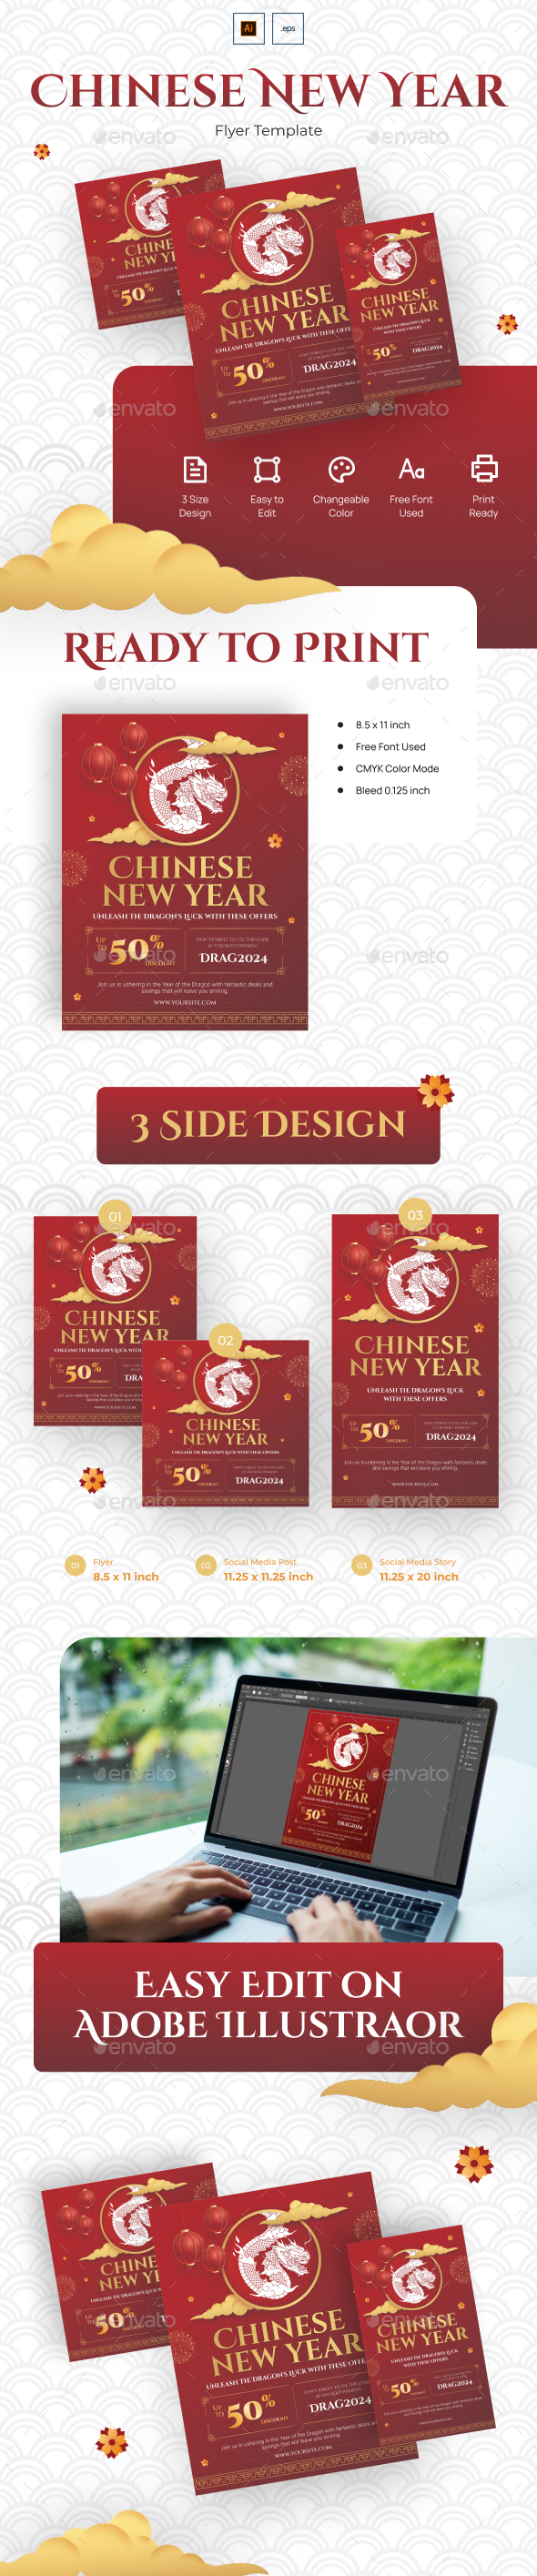 Chinese Lunar New Year Discount Flyer